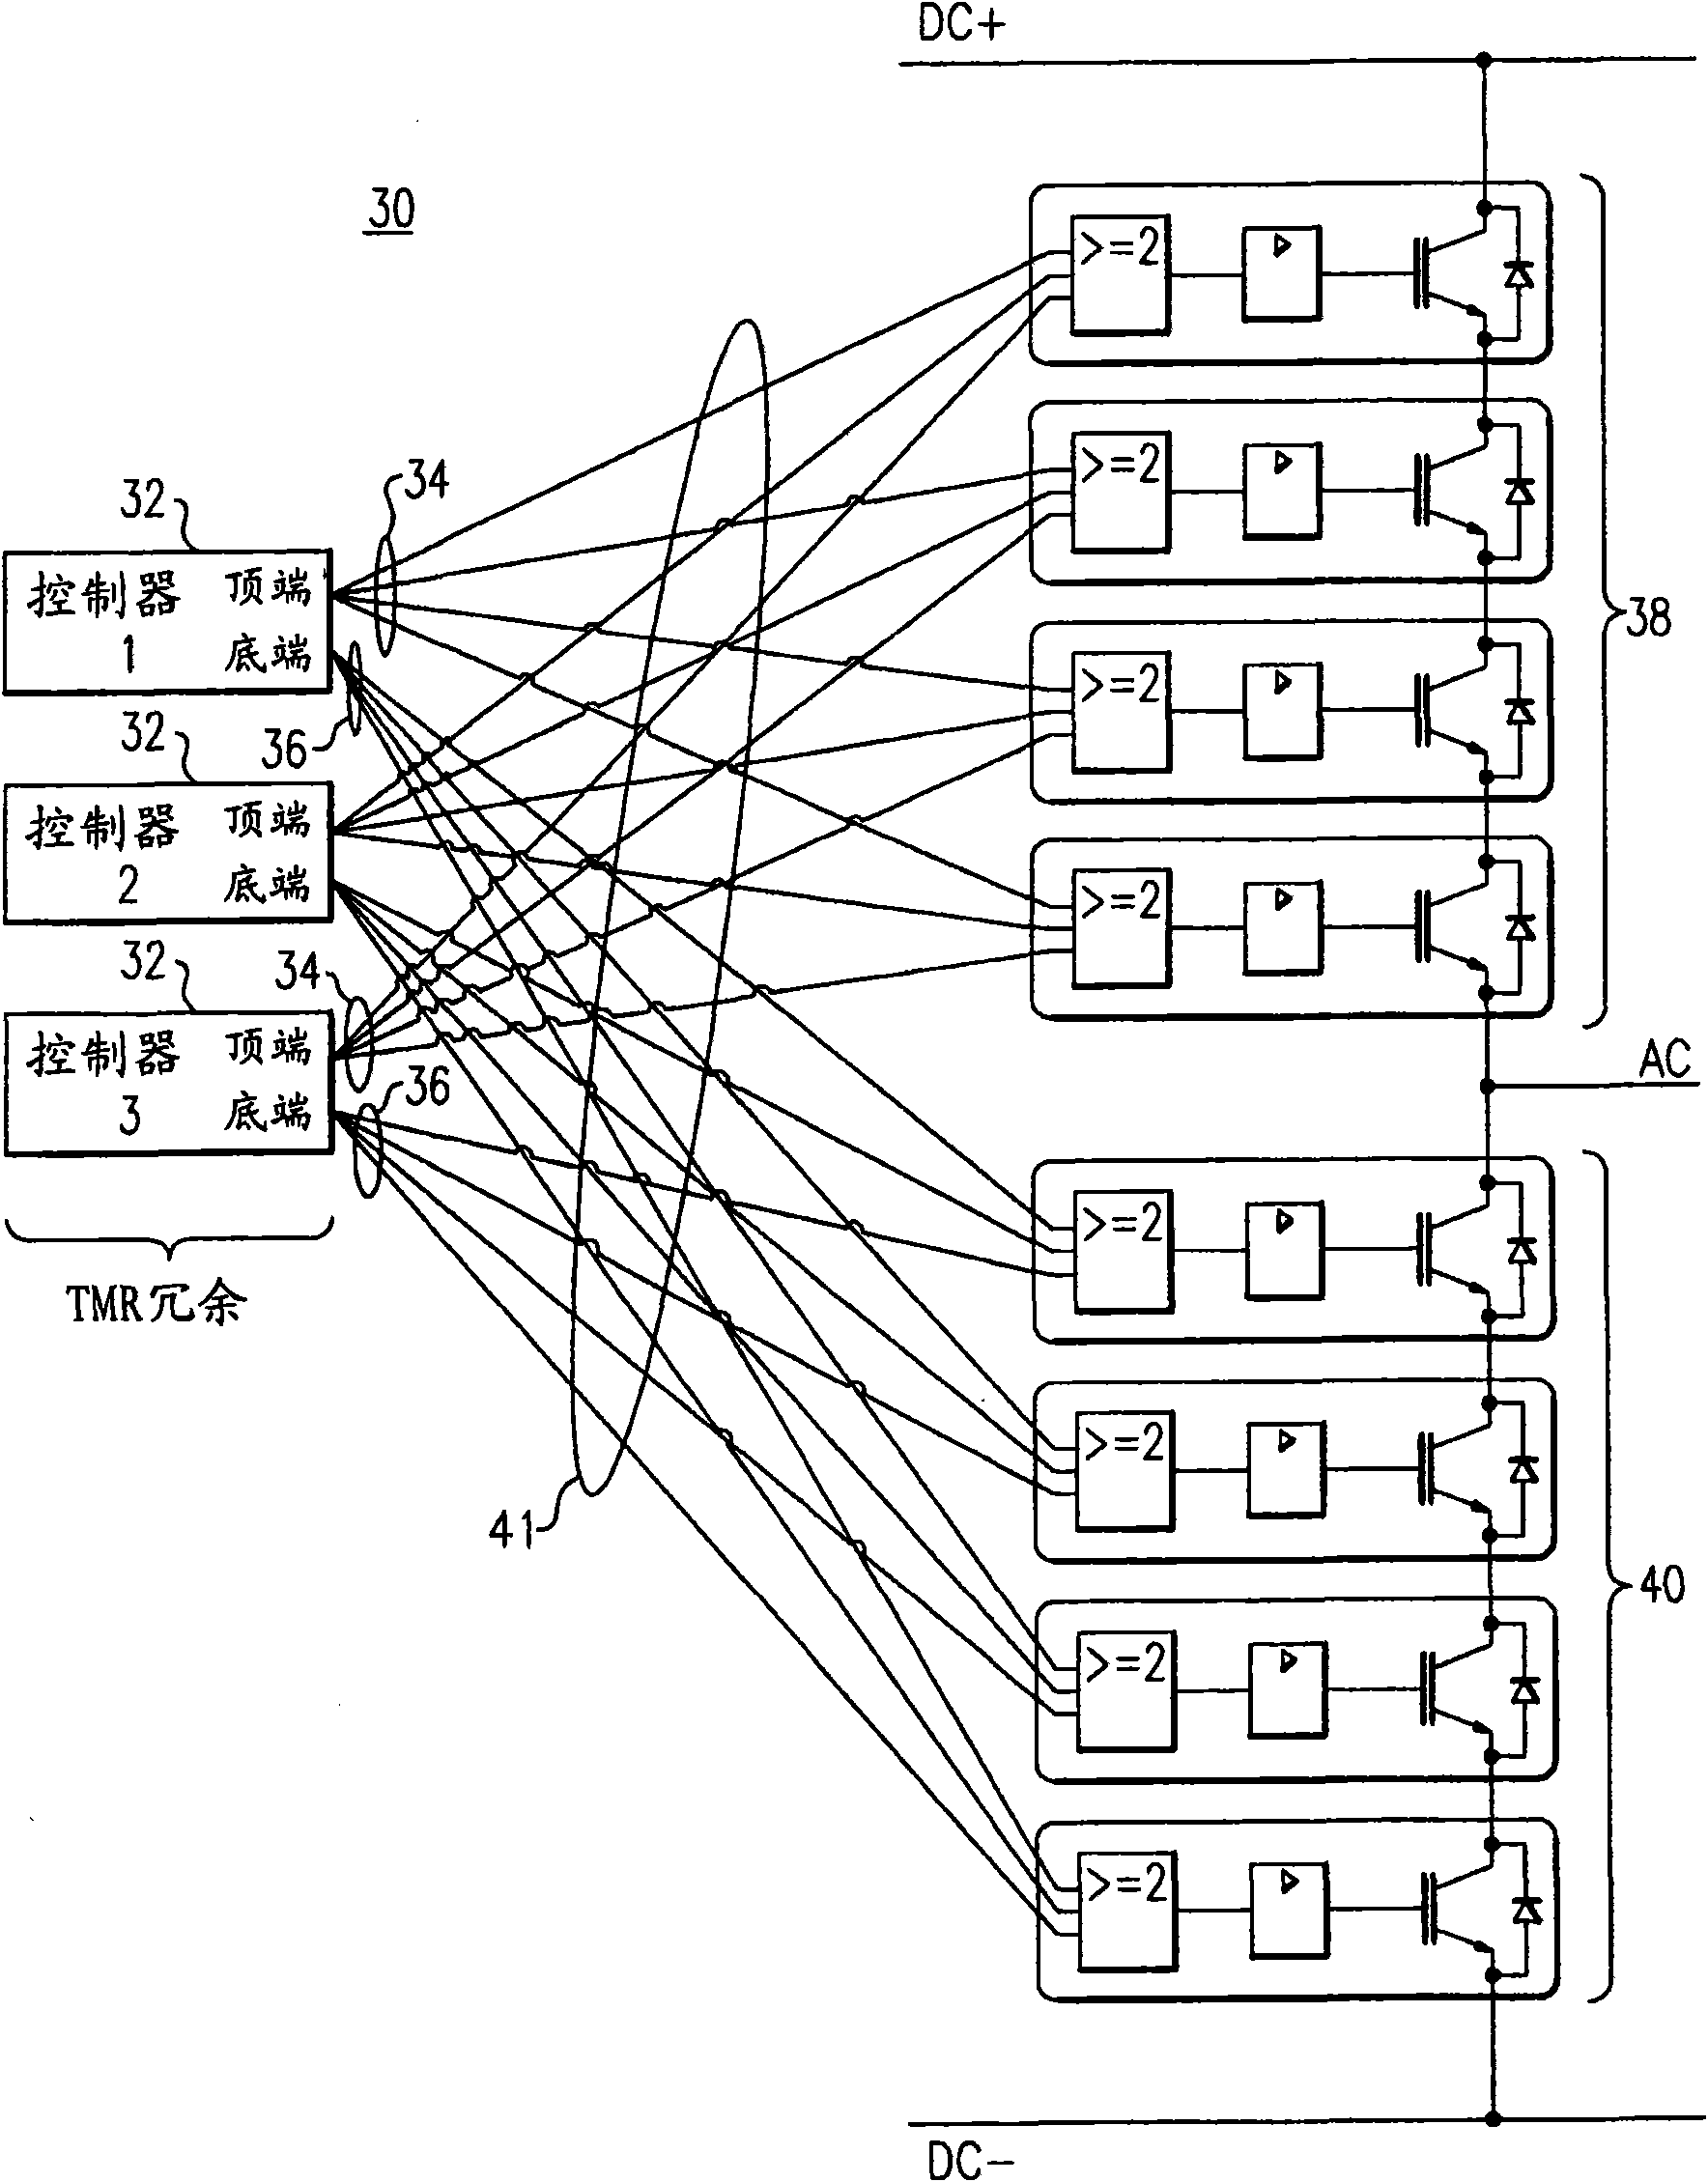 Circuit and topology for high-reliability power electronic device system